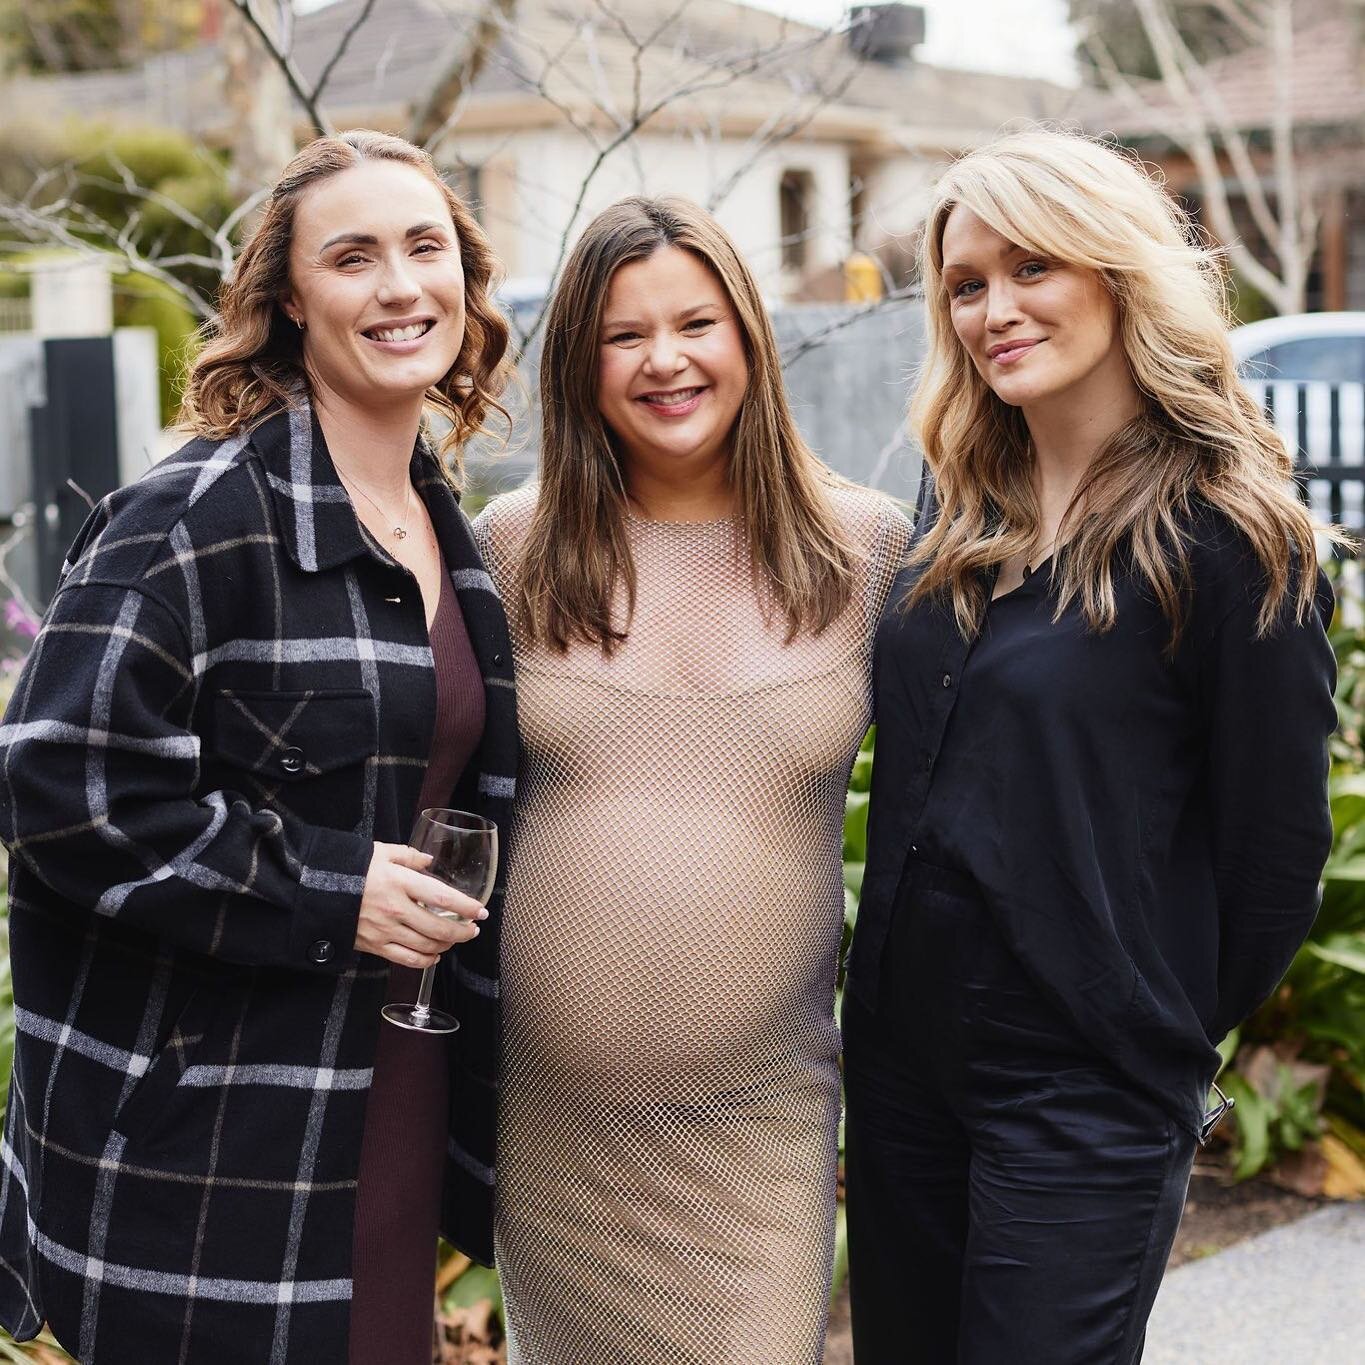 Awwww what a way to spend a Sunday! I love that I am friends with so many celebrants, no competition, just community. Happy baby shower @celebrate_with_liz - we can&rsquo;t wait to meet your gorgeous little one! 
.
.
.
.
@amforlovestudio you are amaz